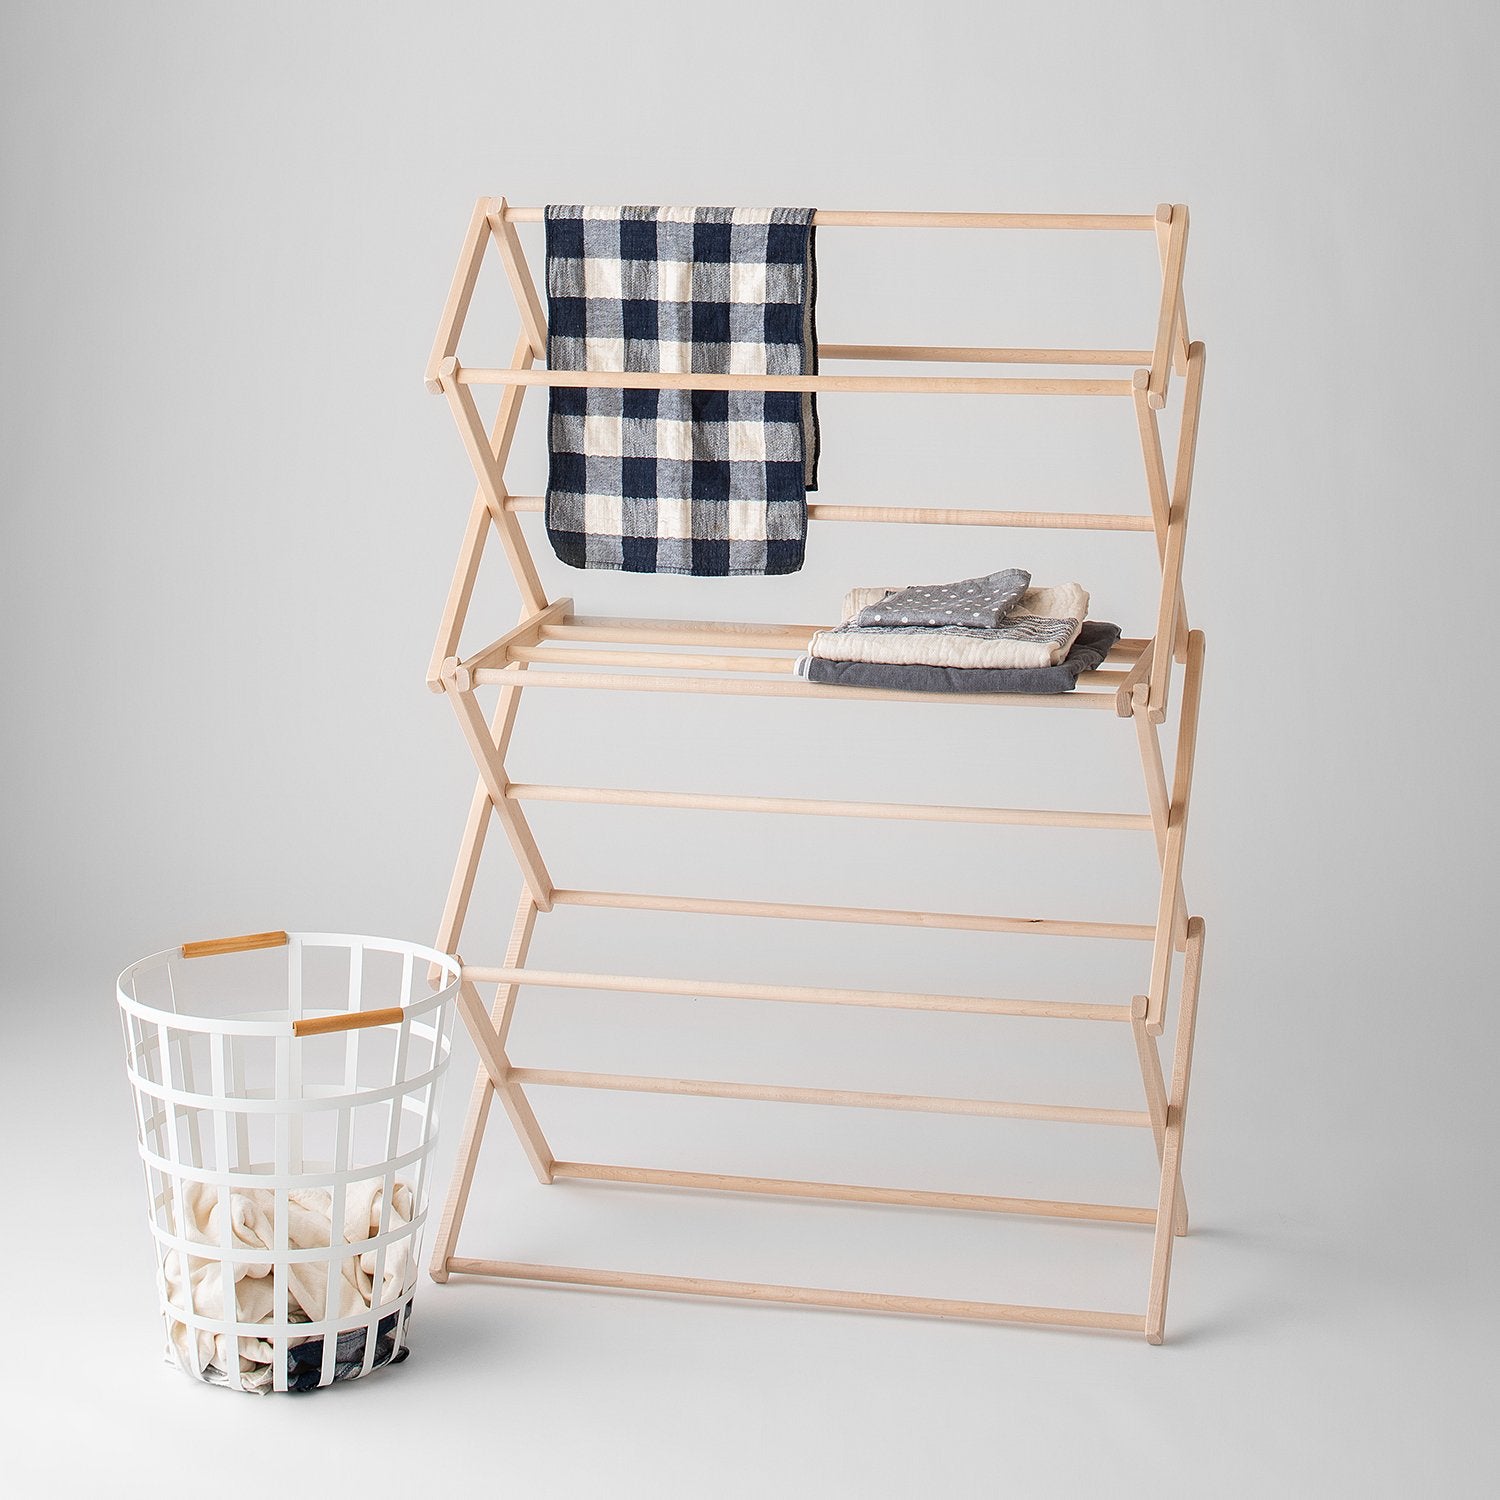 Home it USA Bamboo 3-Tier Freestanding Wood Drying Rack - Natural Brown,  Indoor Clothes Drying Stand, Space-Saving, 14-1/2-in x 29-1/2-in x 41-3/4  in the Clotheslines & Drying Racks department at Lowes.com